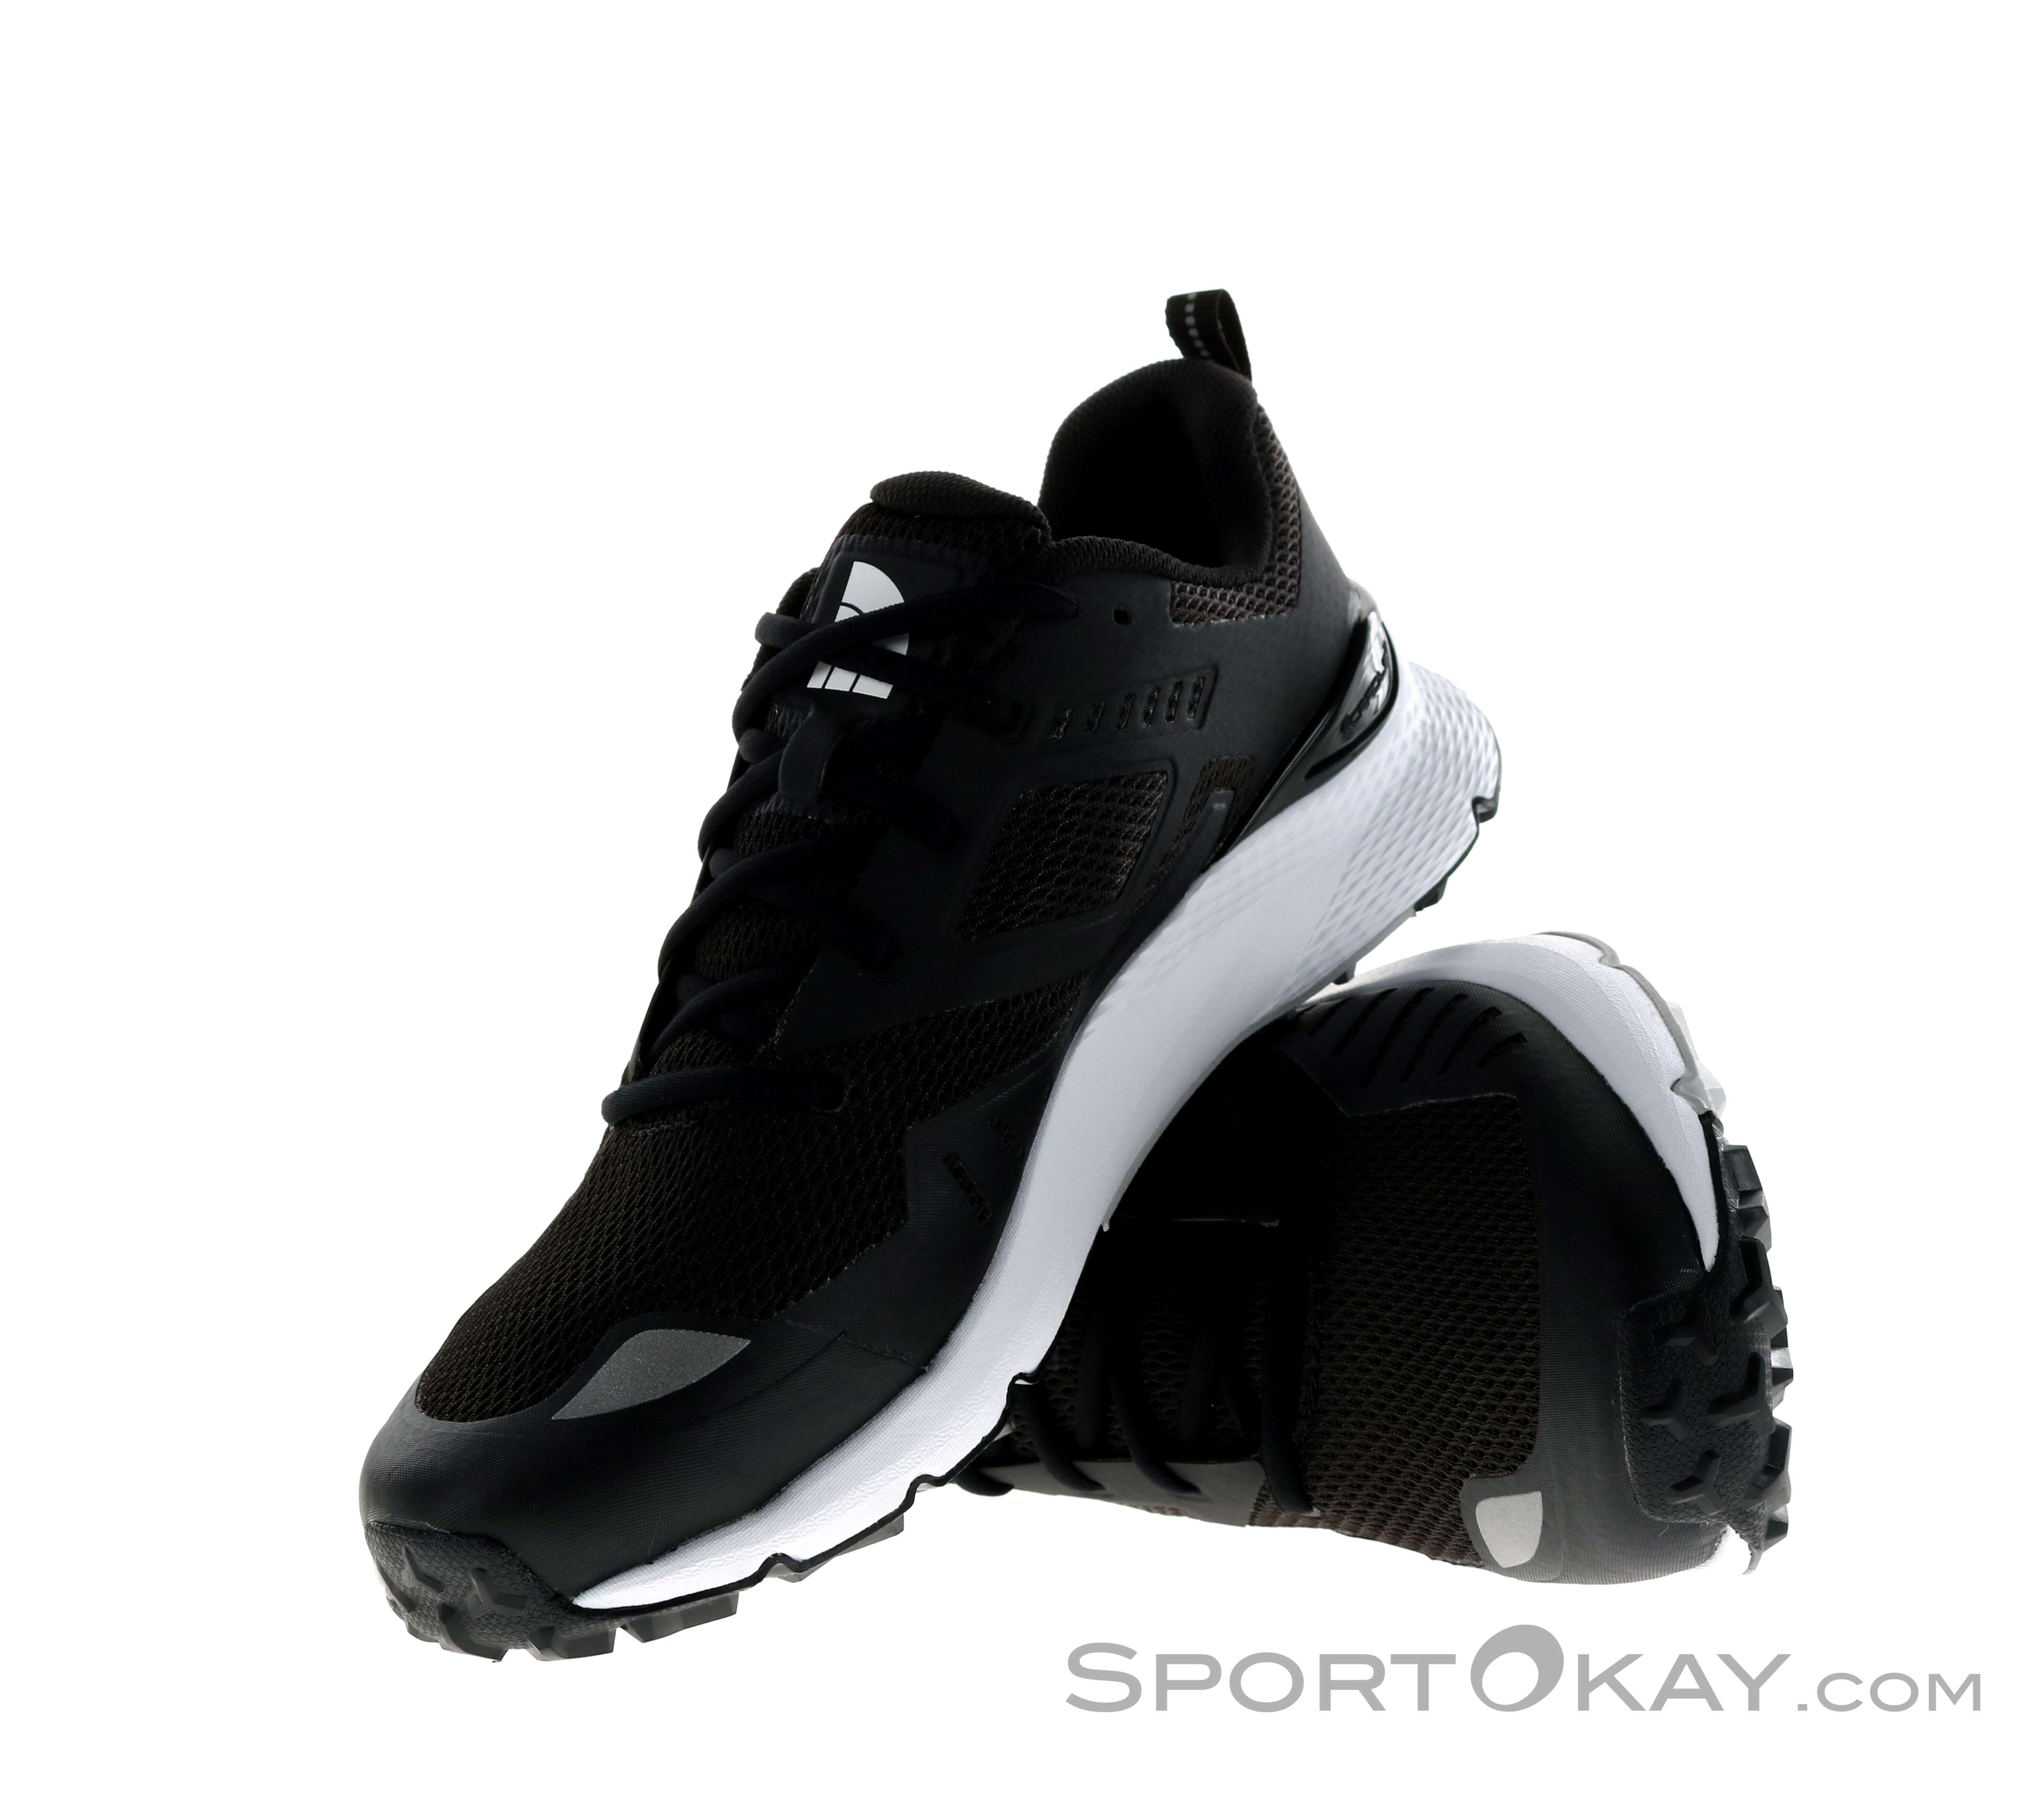 north face lightweight shoes